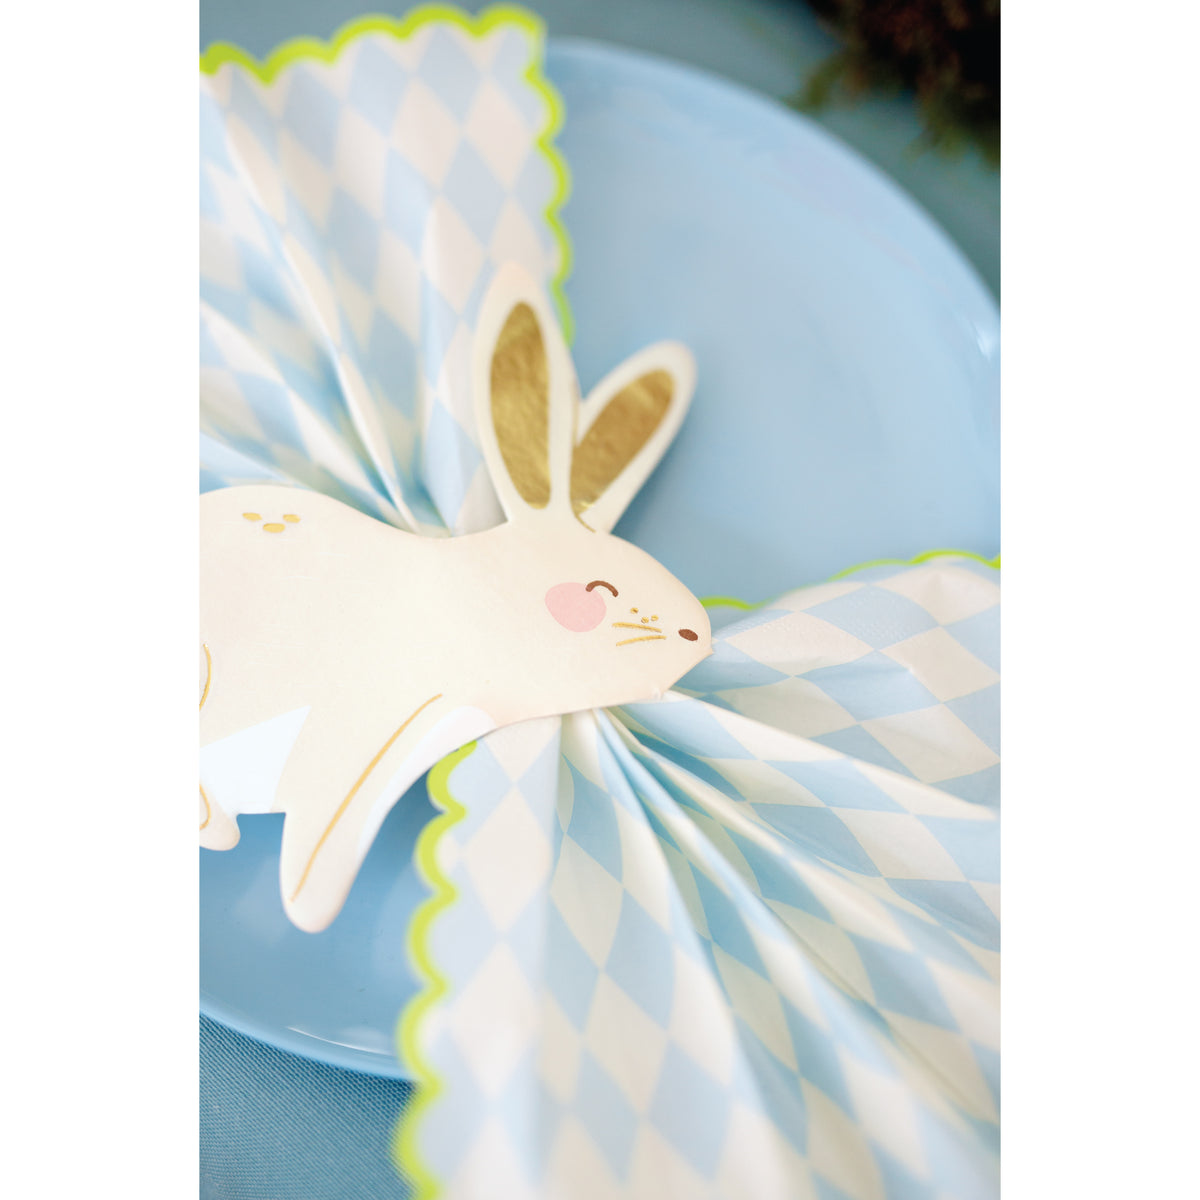 Cohasset Party Supply - So many adorable Peter Rabbit party supplies still  in stock for Easter!